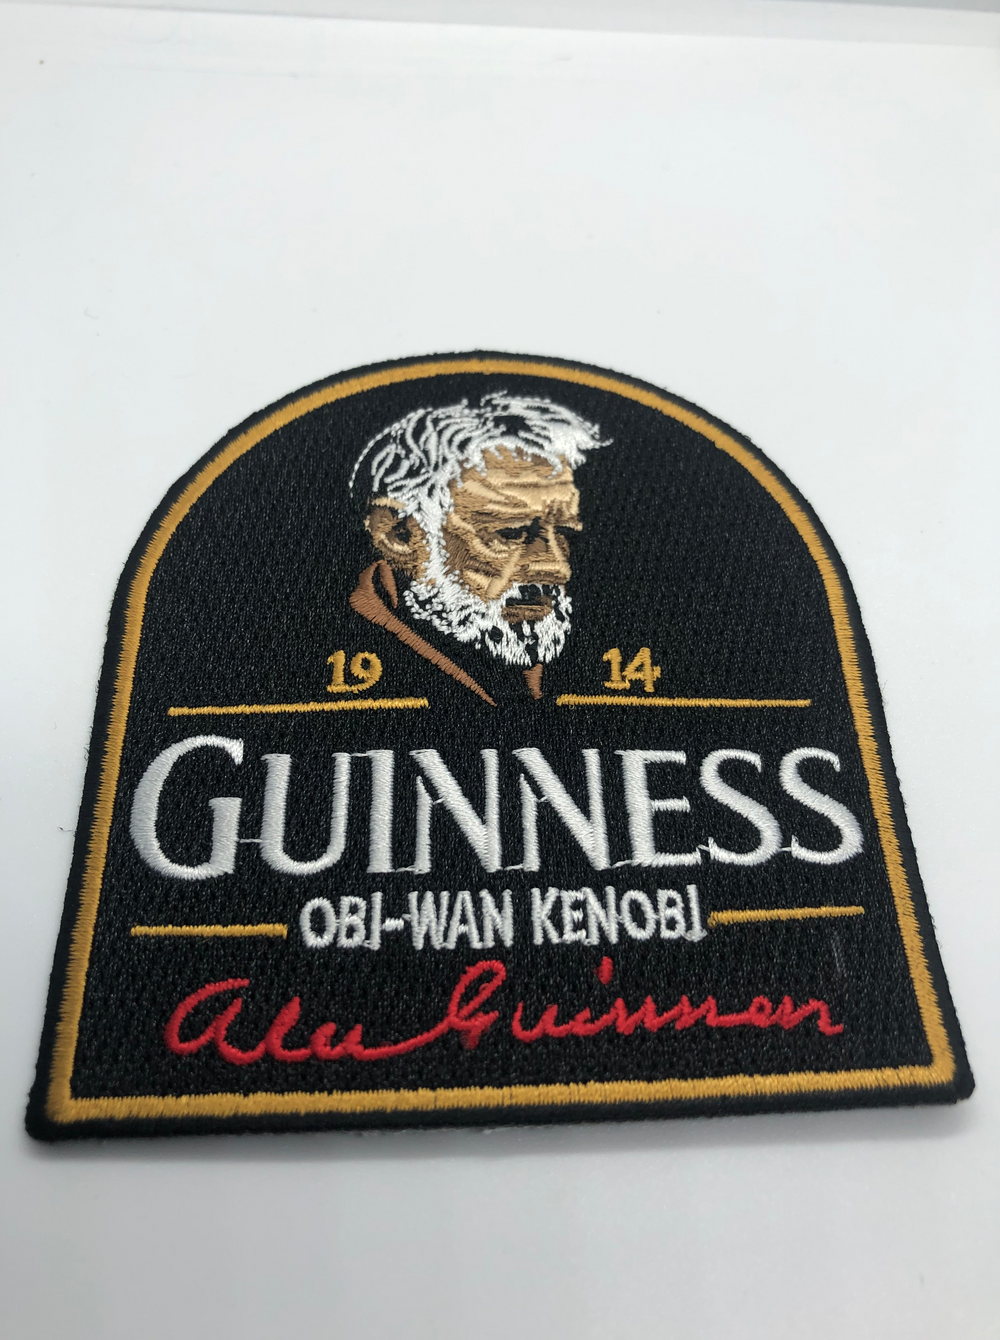 Star Wars Patch Collection Obi Wan Kenobi Guiness Patch